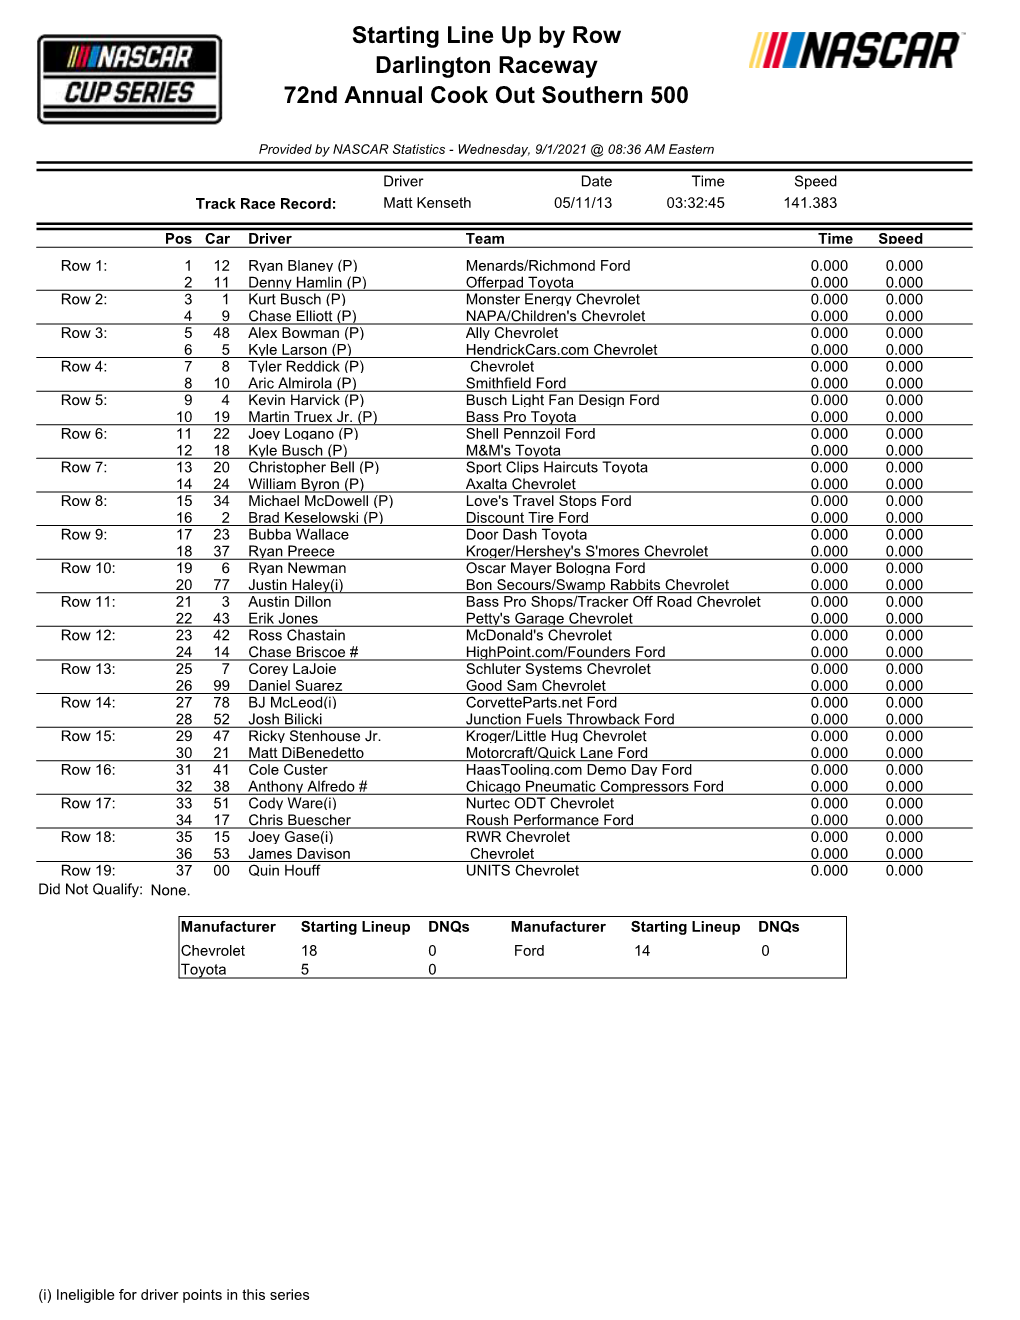 Starting Line up by Row Darlington Raceway 72Nd Annual Cook out Southern 500